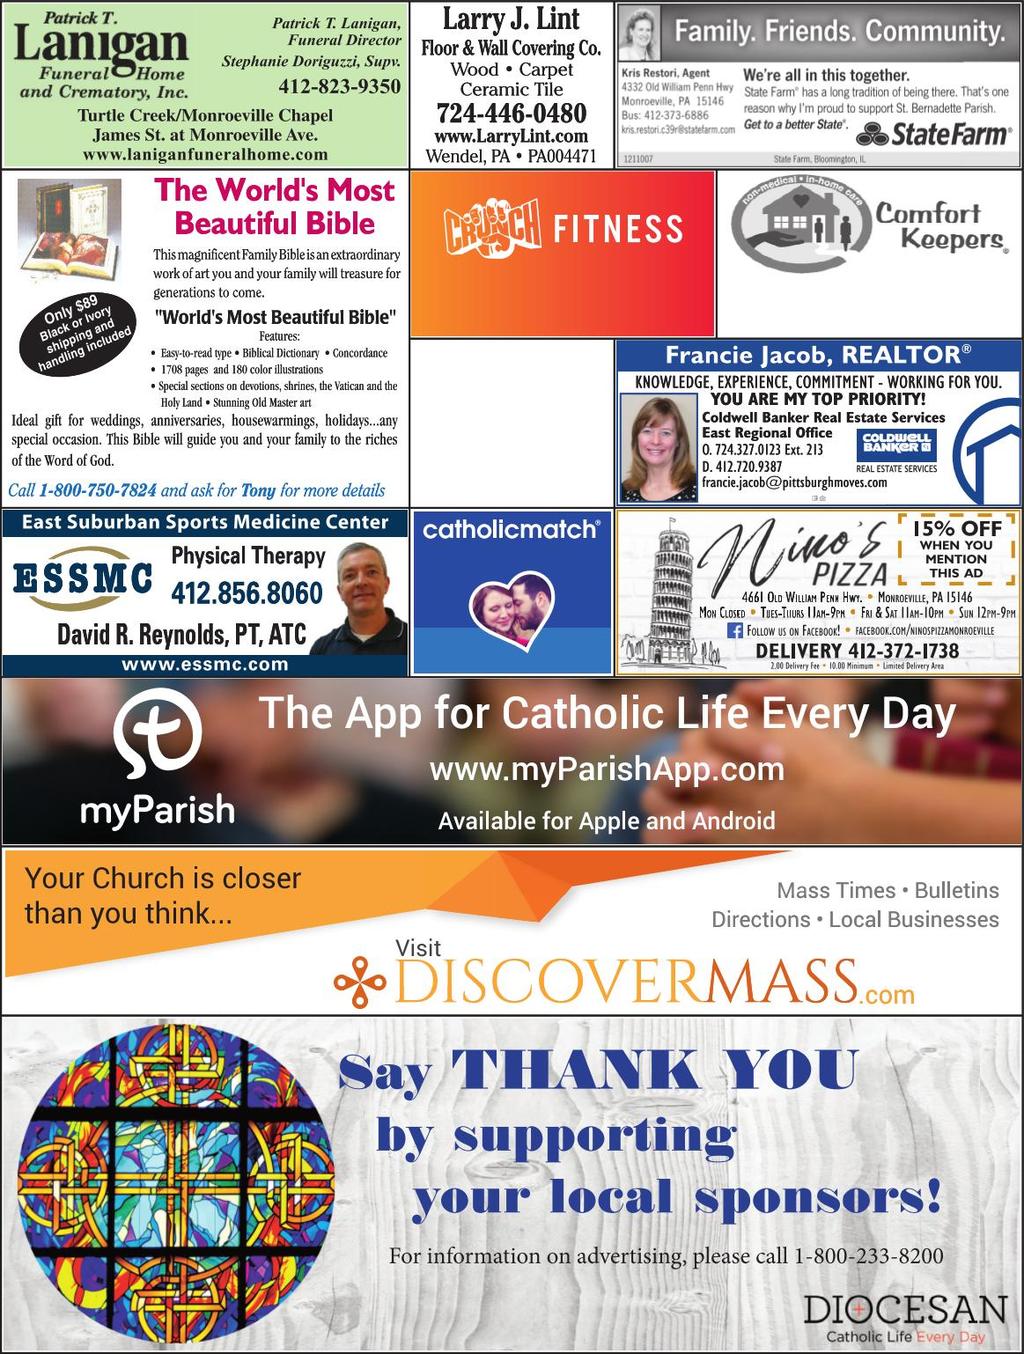 View Our Parish Supporters at www.discovermass.com 4049 William Penn Hwy Monroeville, PA 412.373.1072 Crunch.